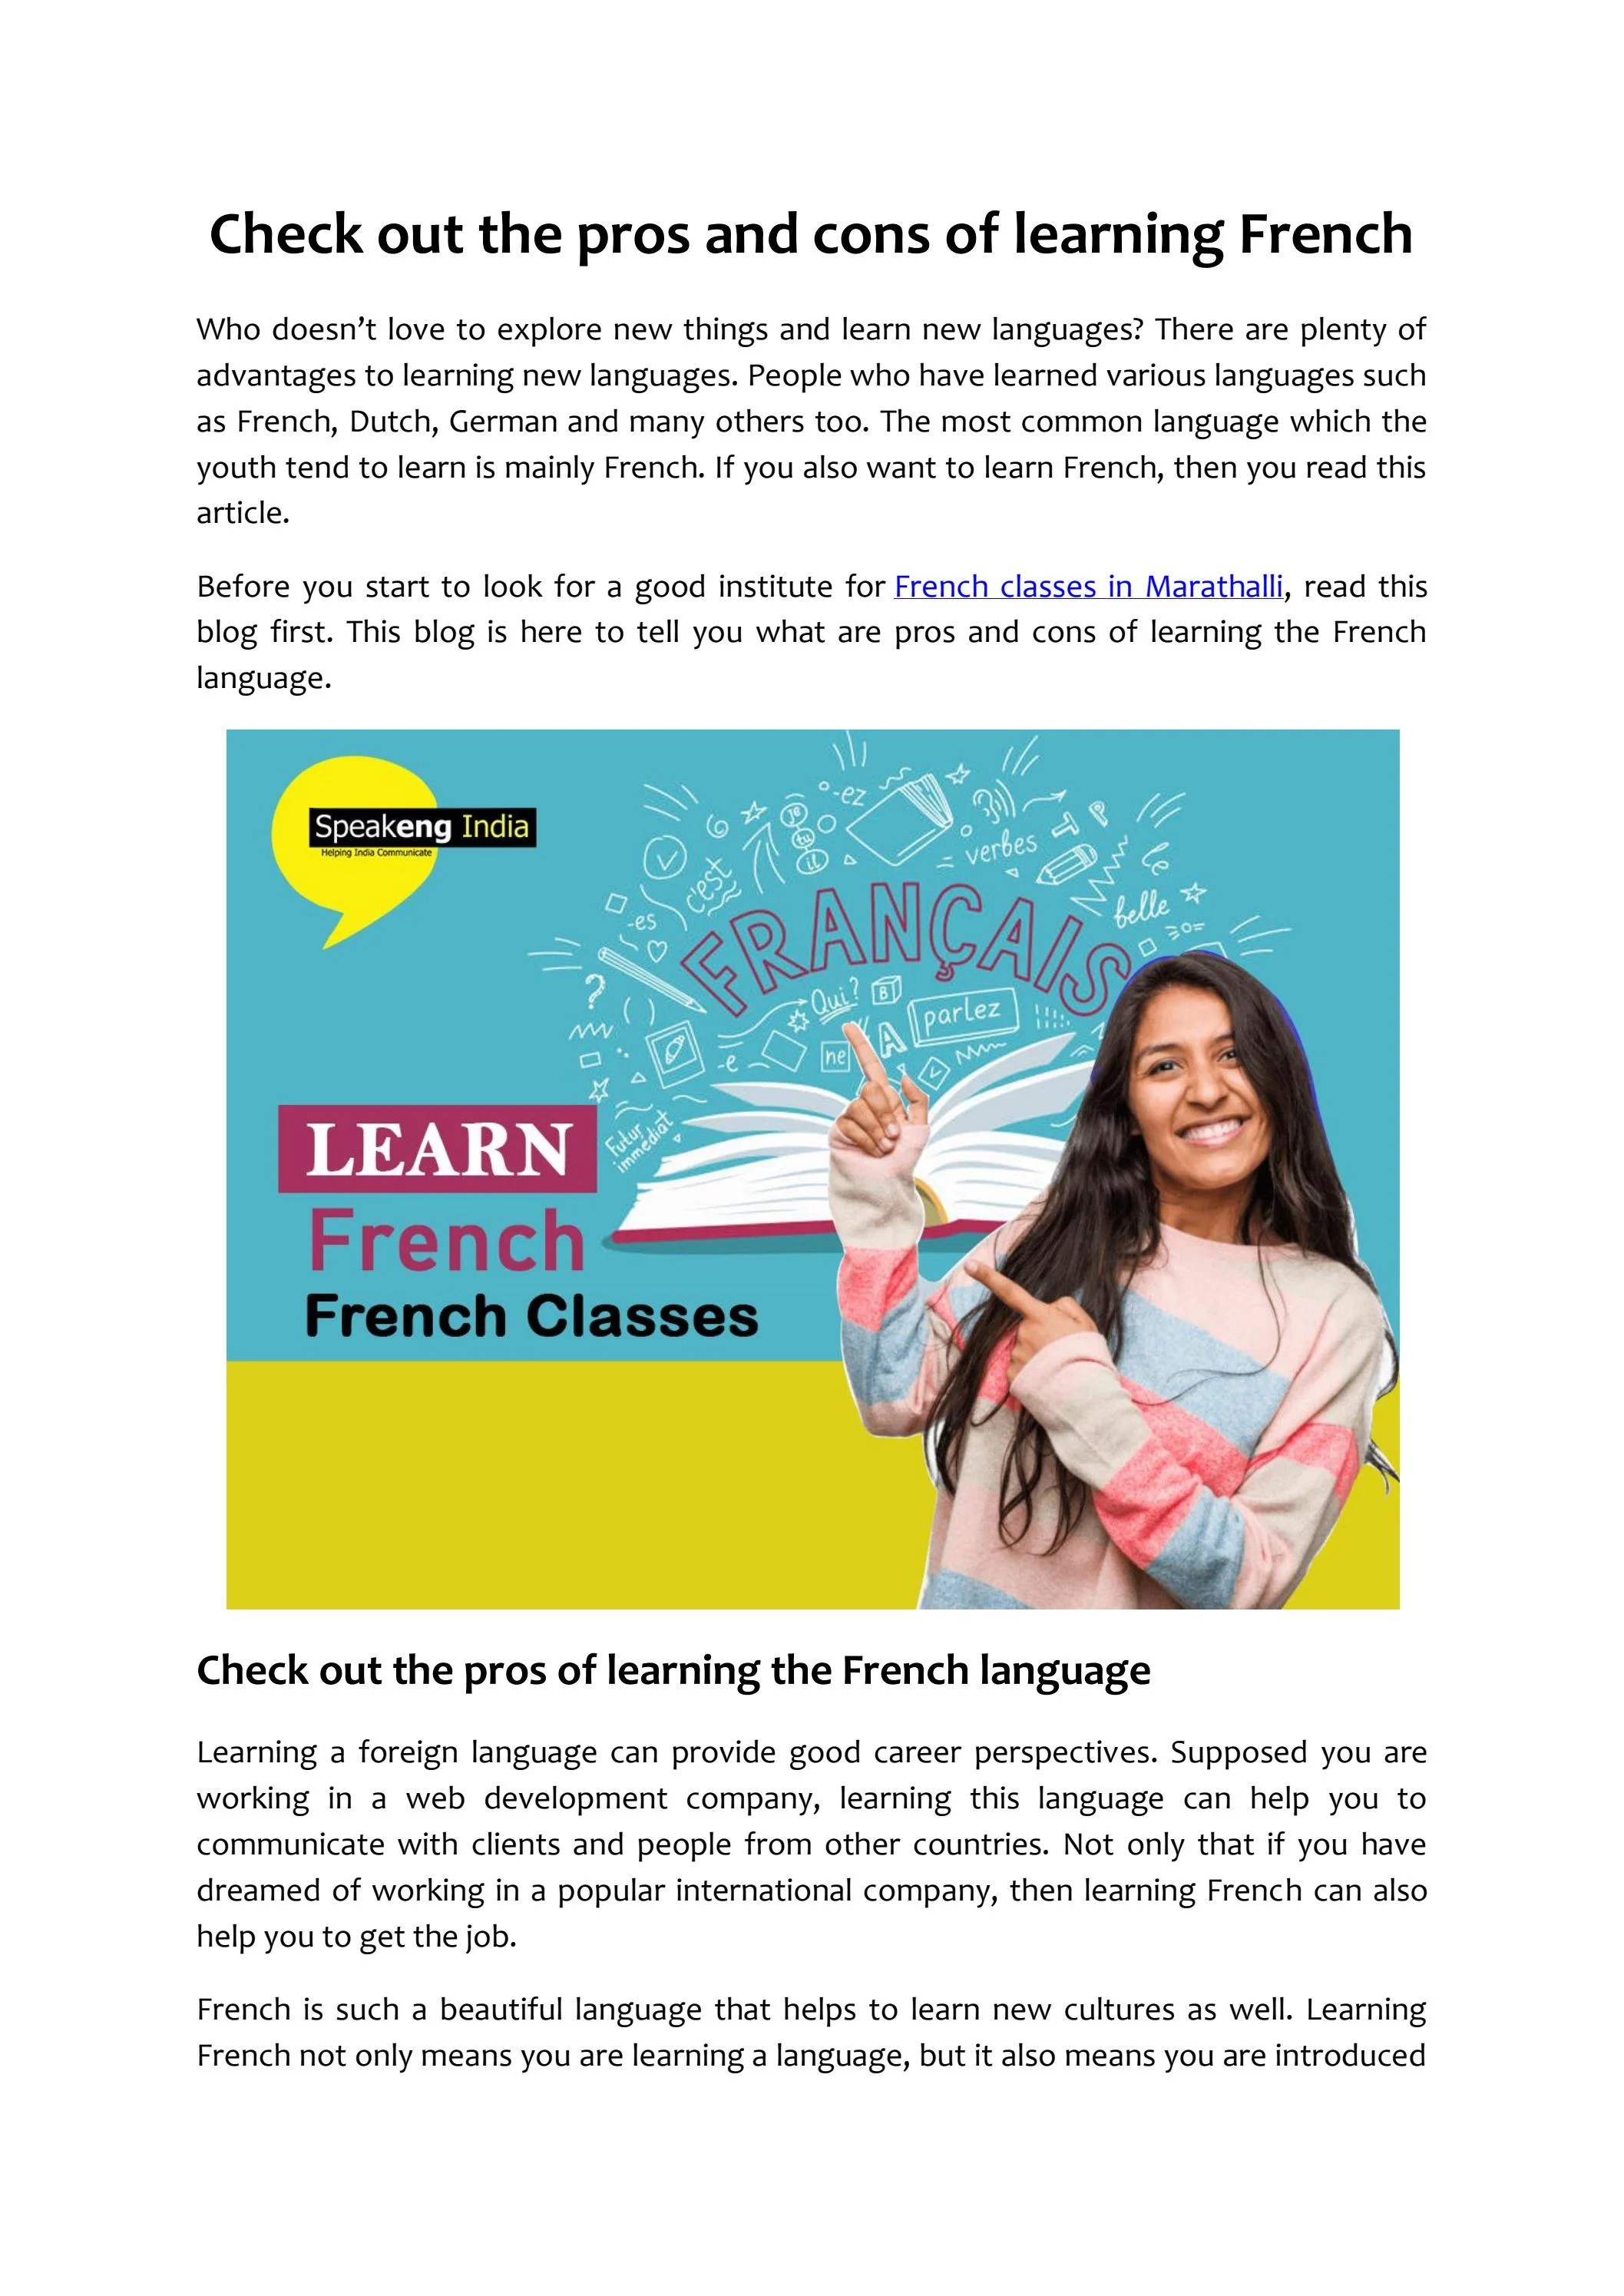 Where To Start Learning French